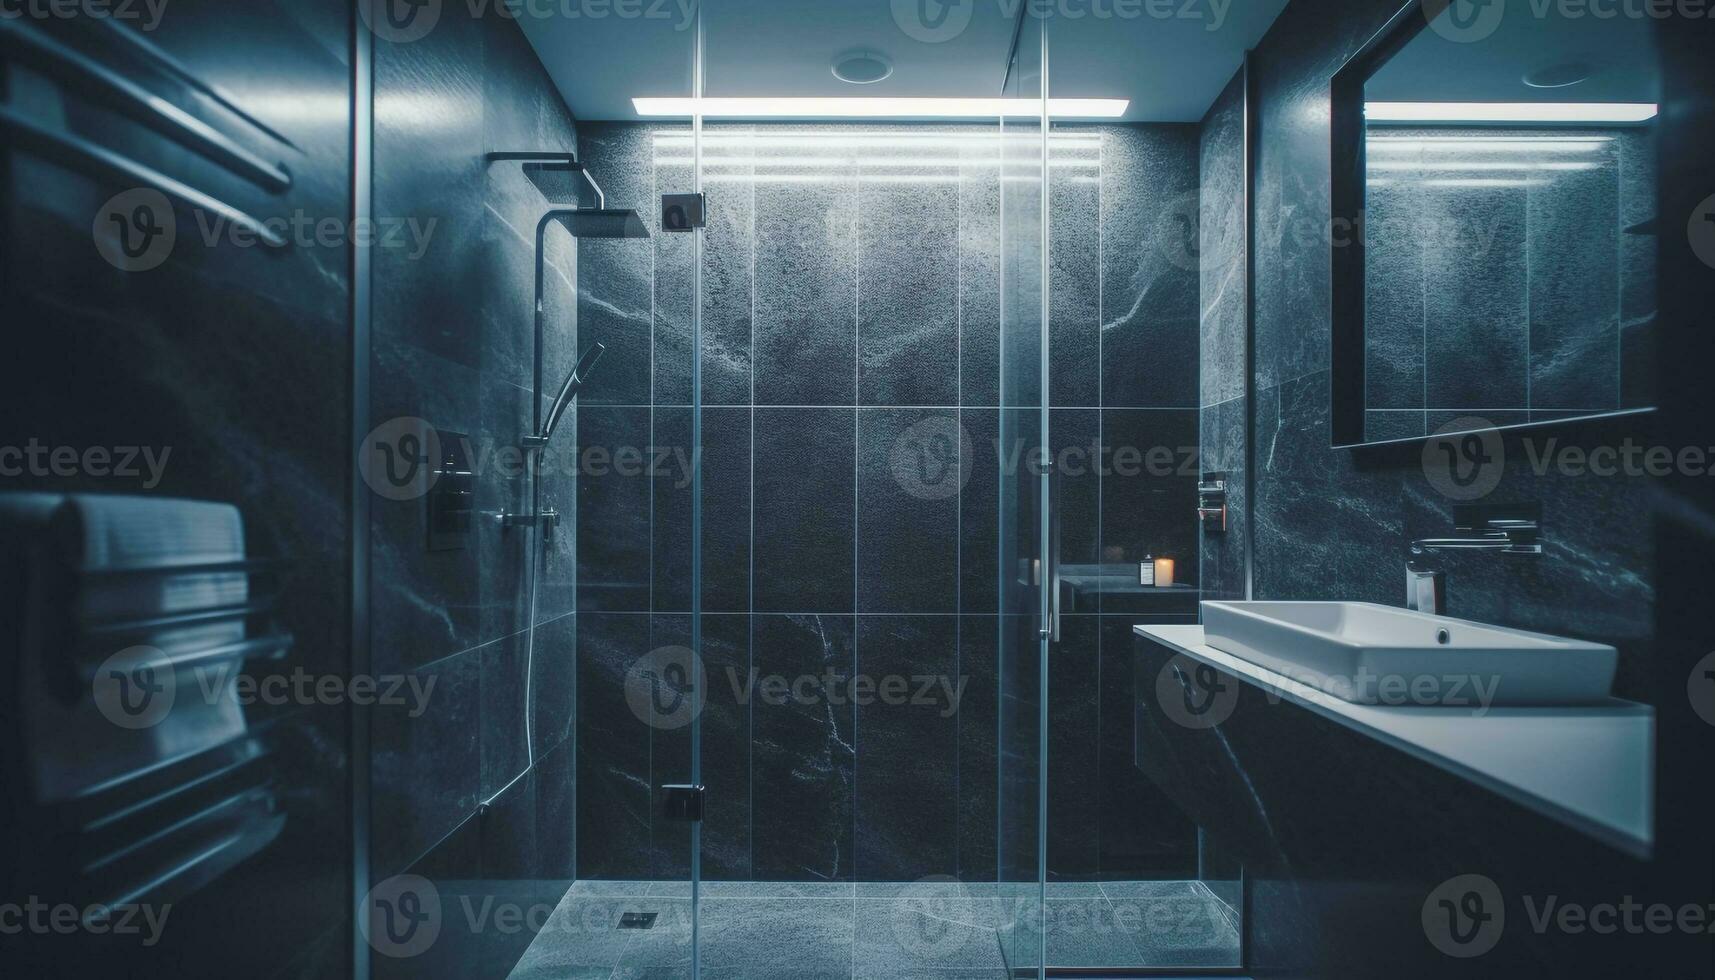 Modern domestic bathroom design with blue tile, chrome faucet, and illuminated cabinet generated by AI photo